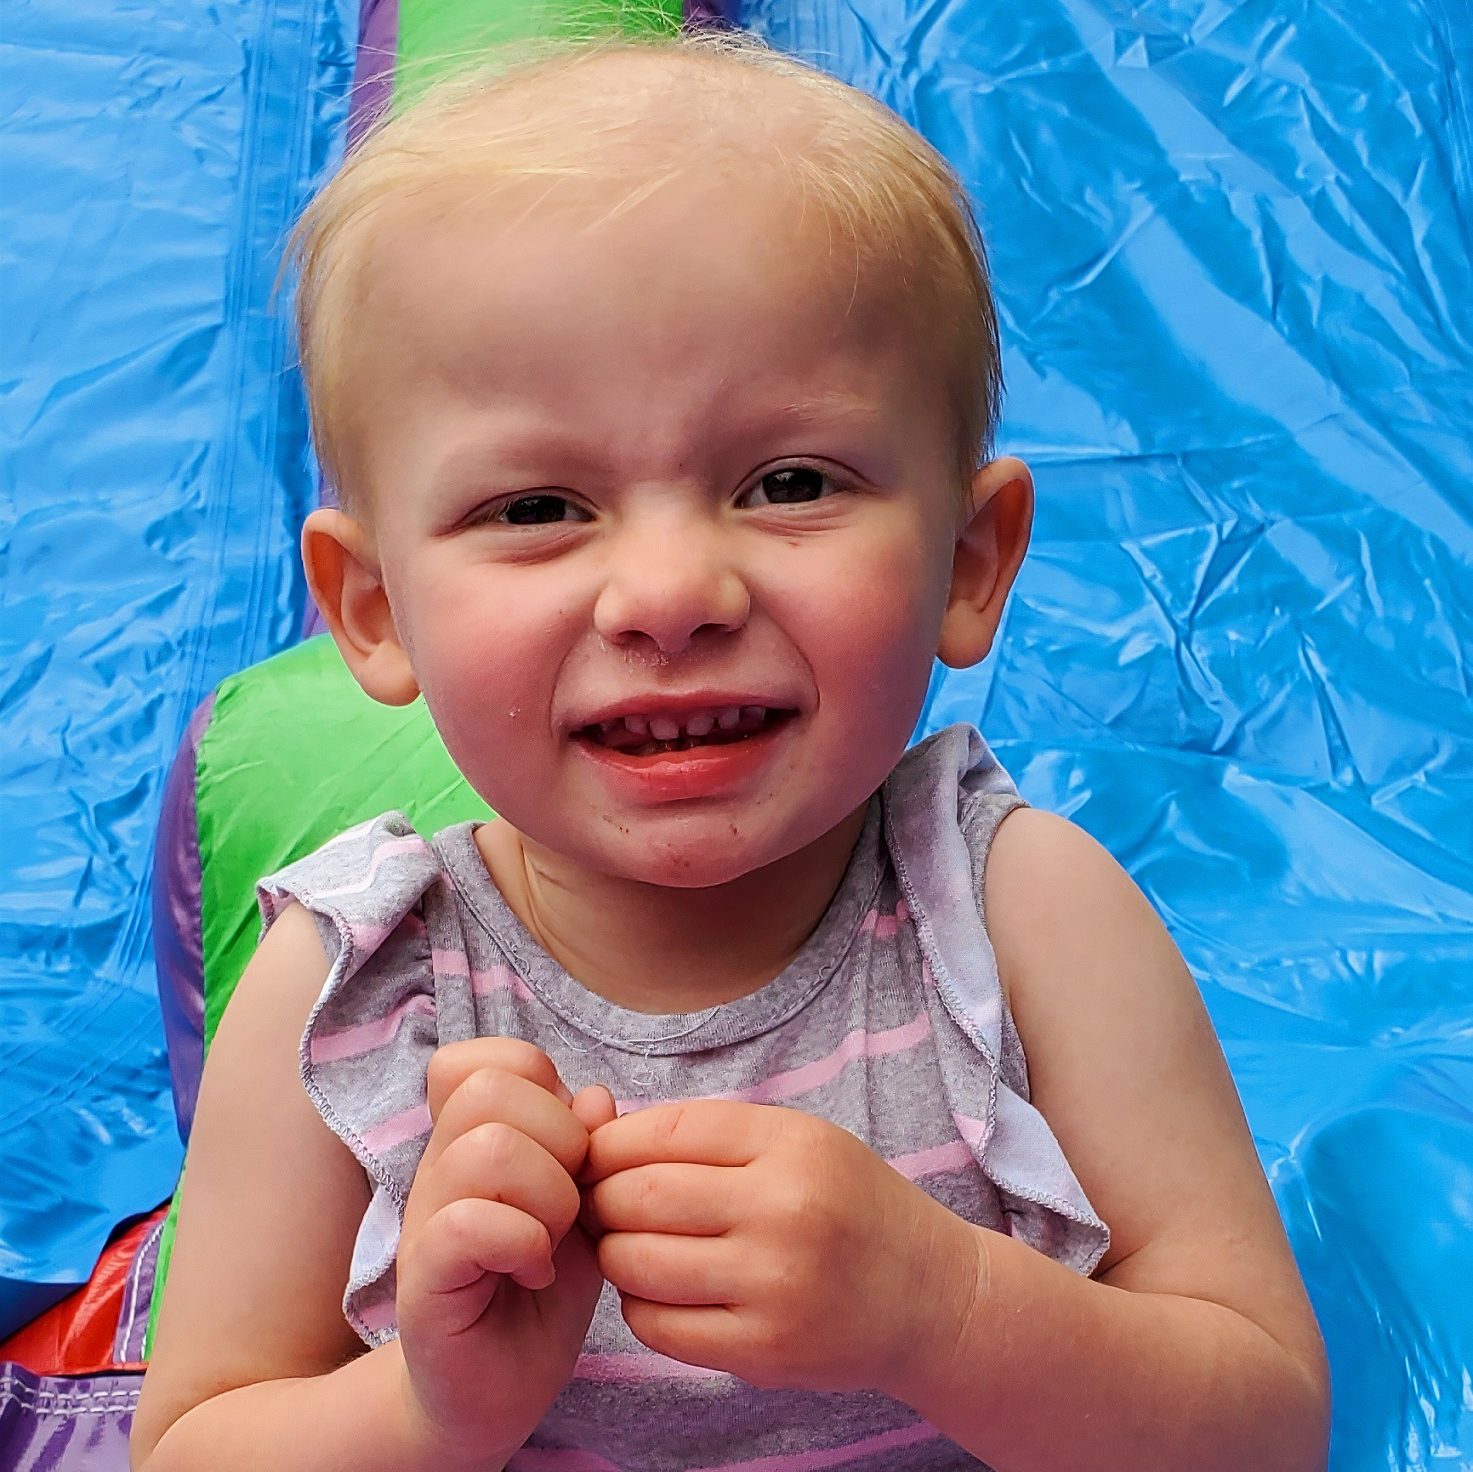 Little girl smiling for the camera on an inflatable toy